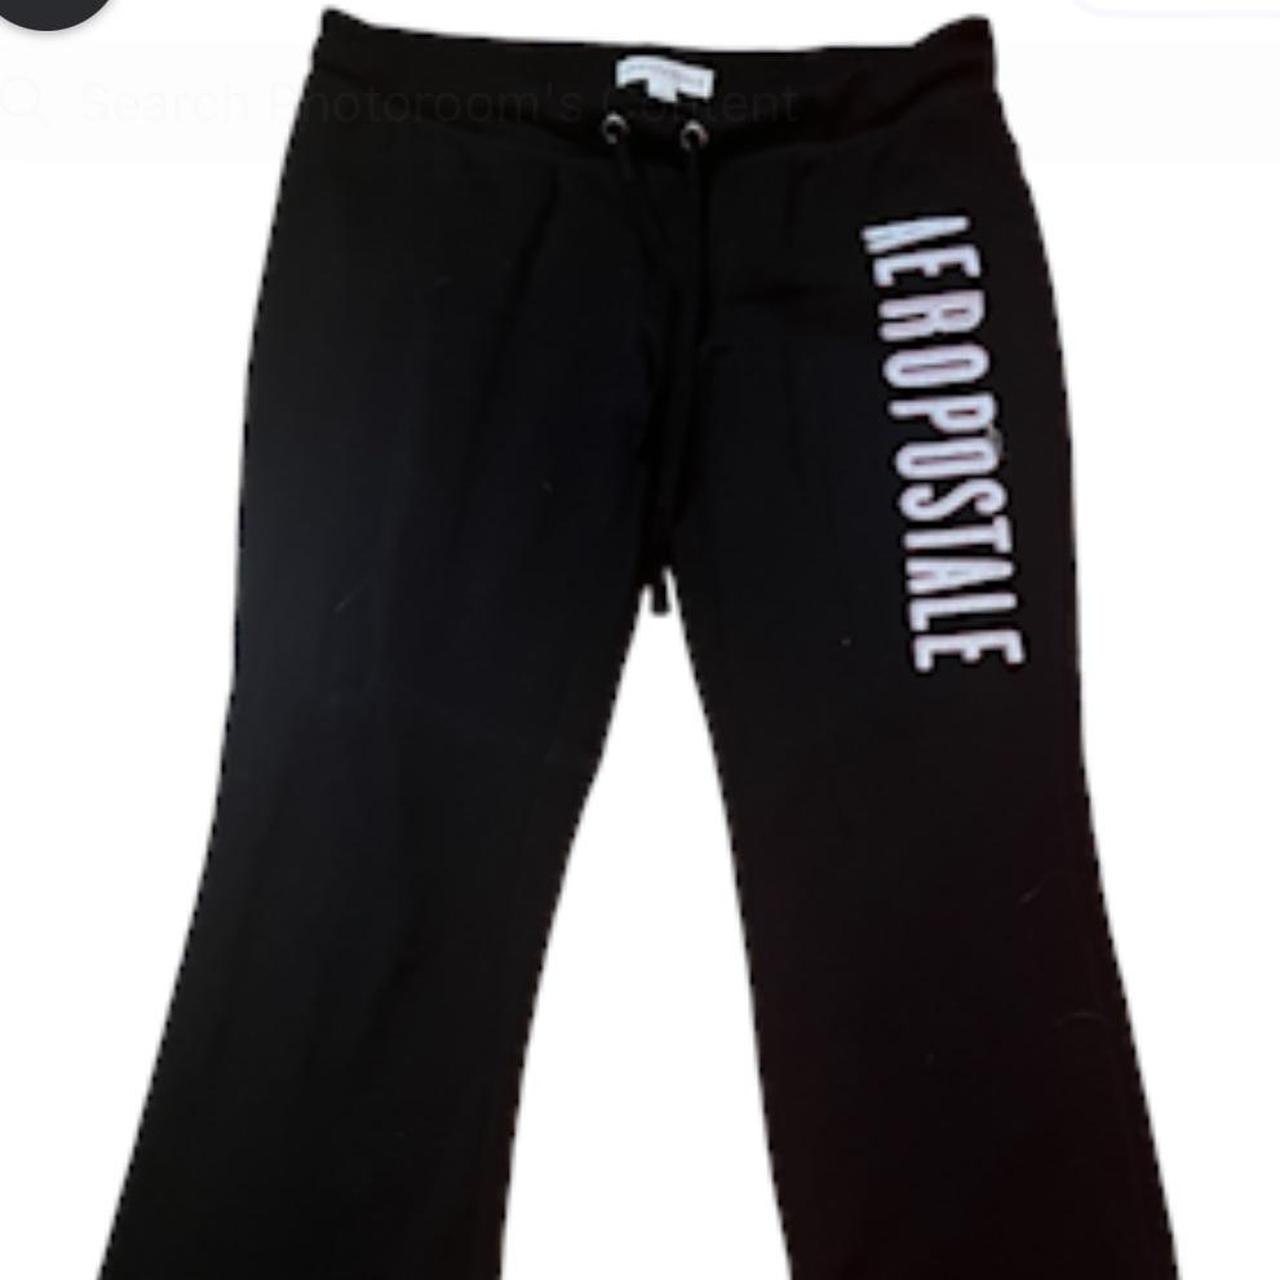 aeropostale flare sweats, super cute!, may have some